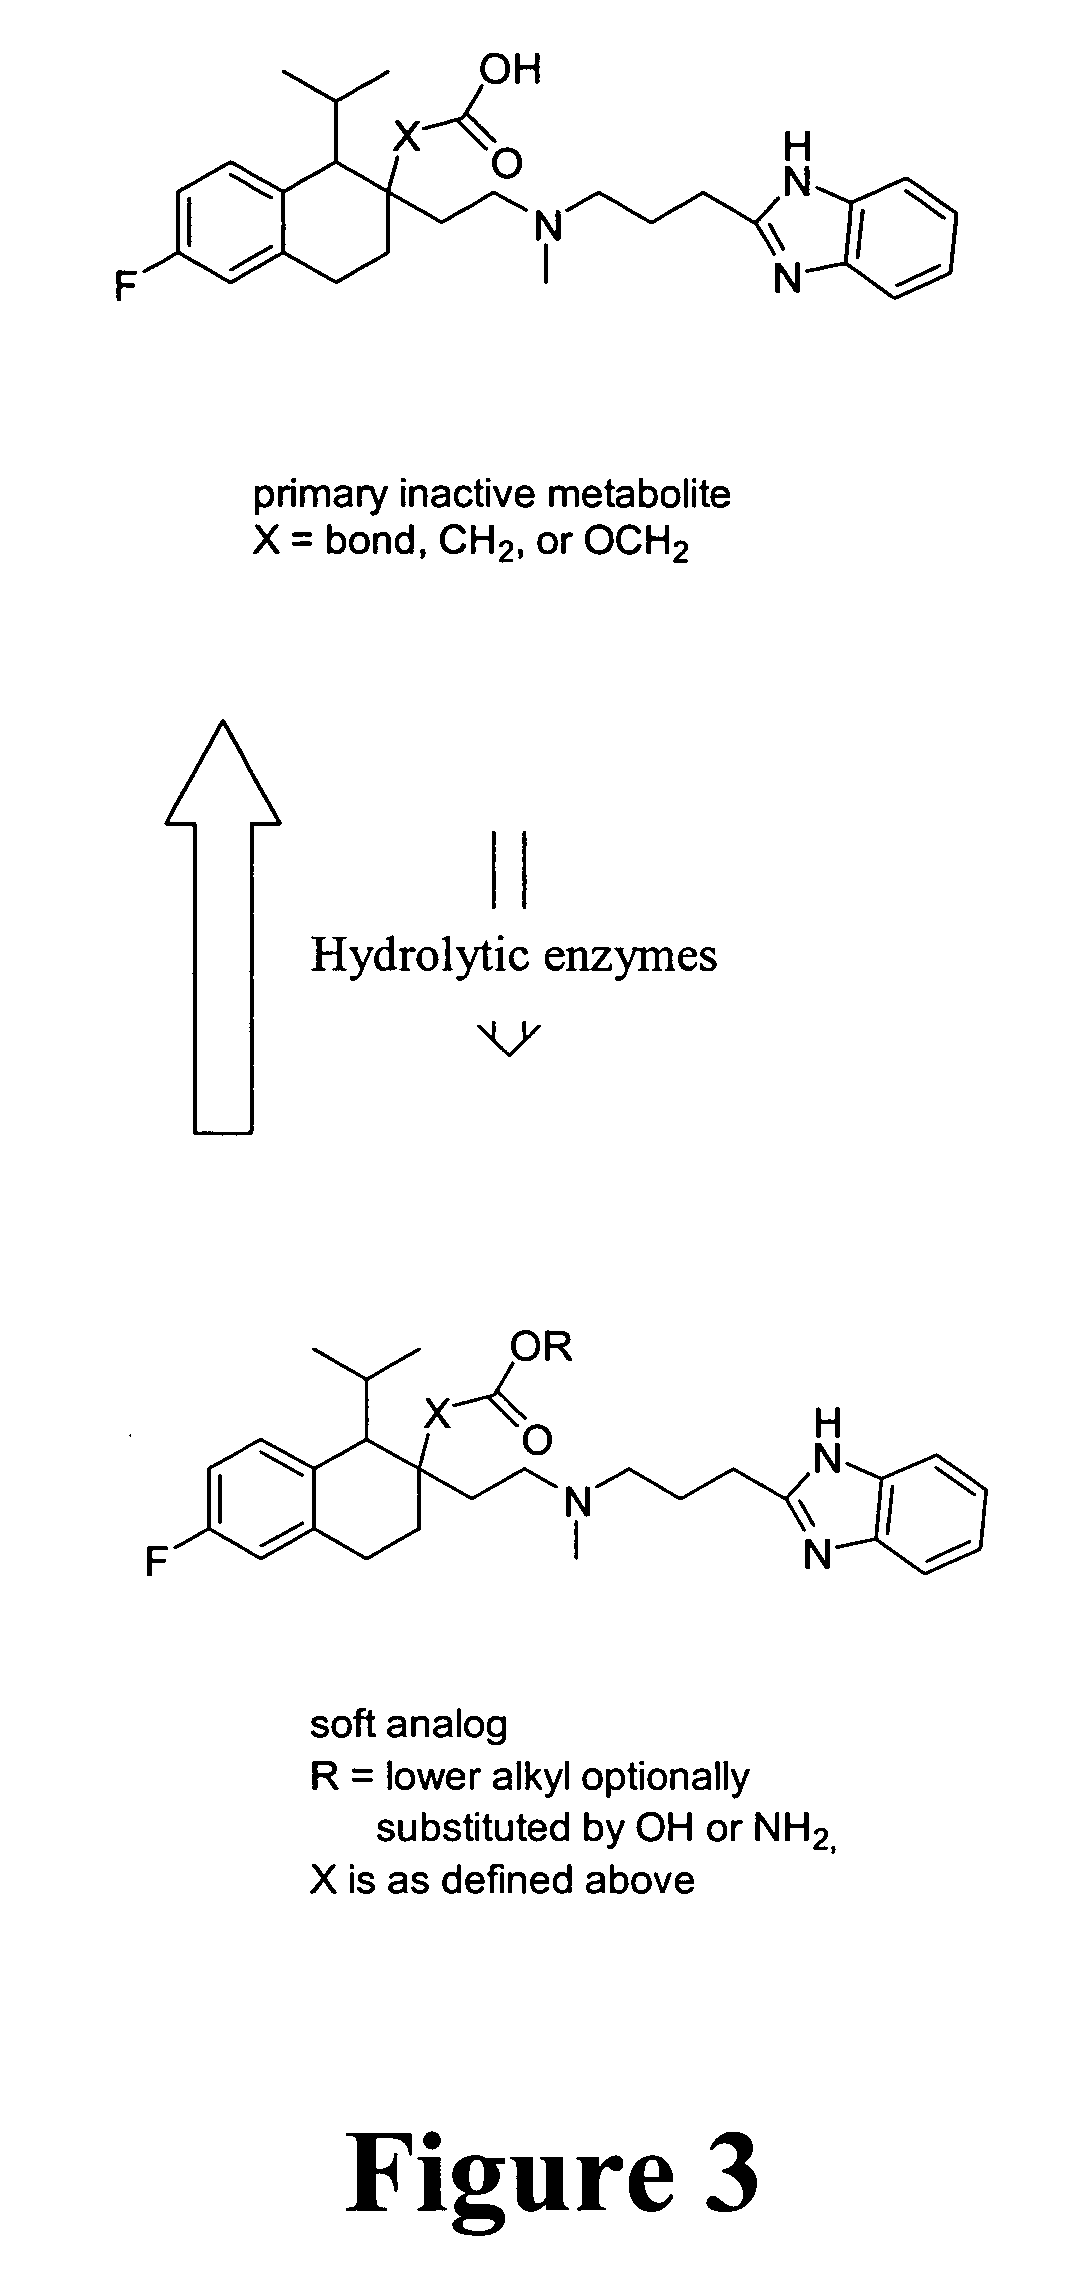 Materials and methods for the treatment of hypertension and angina